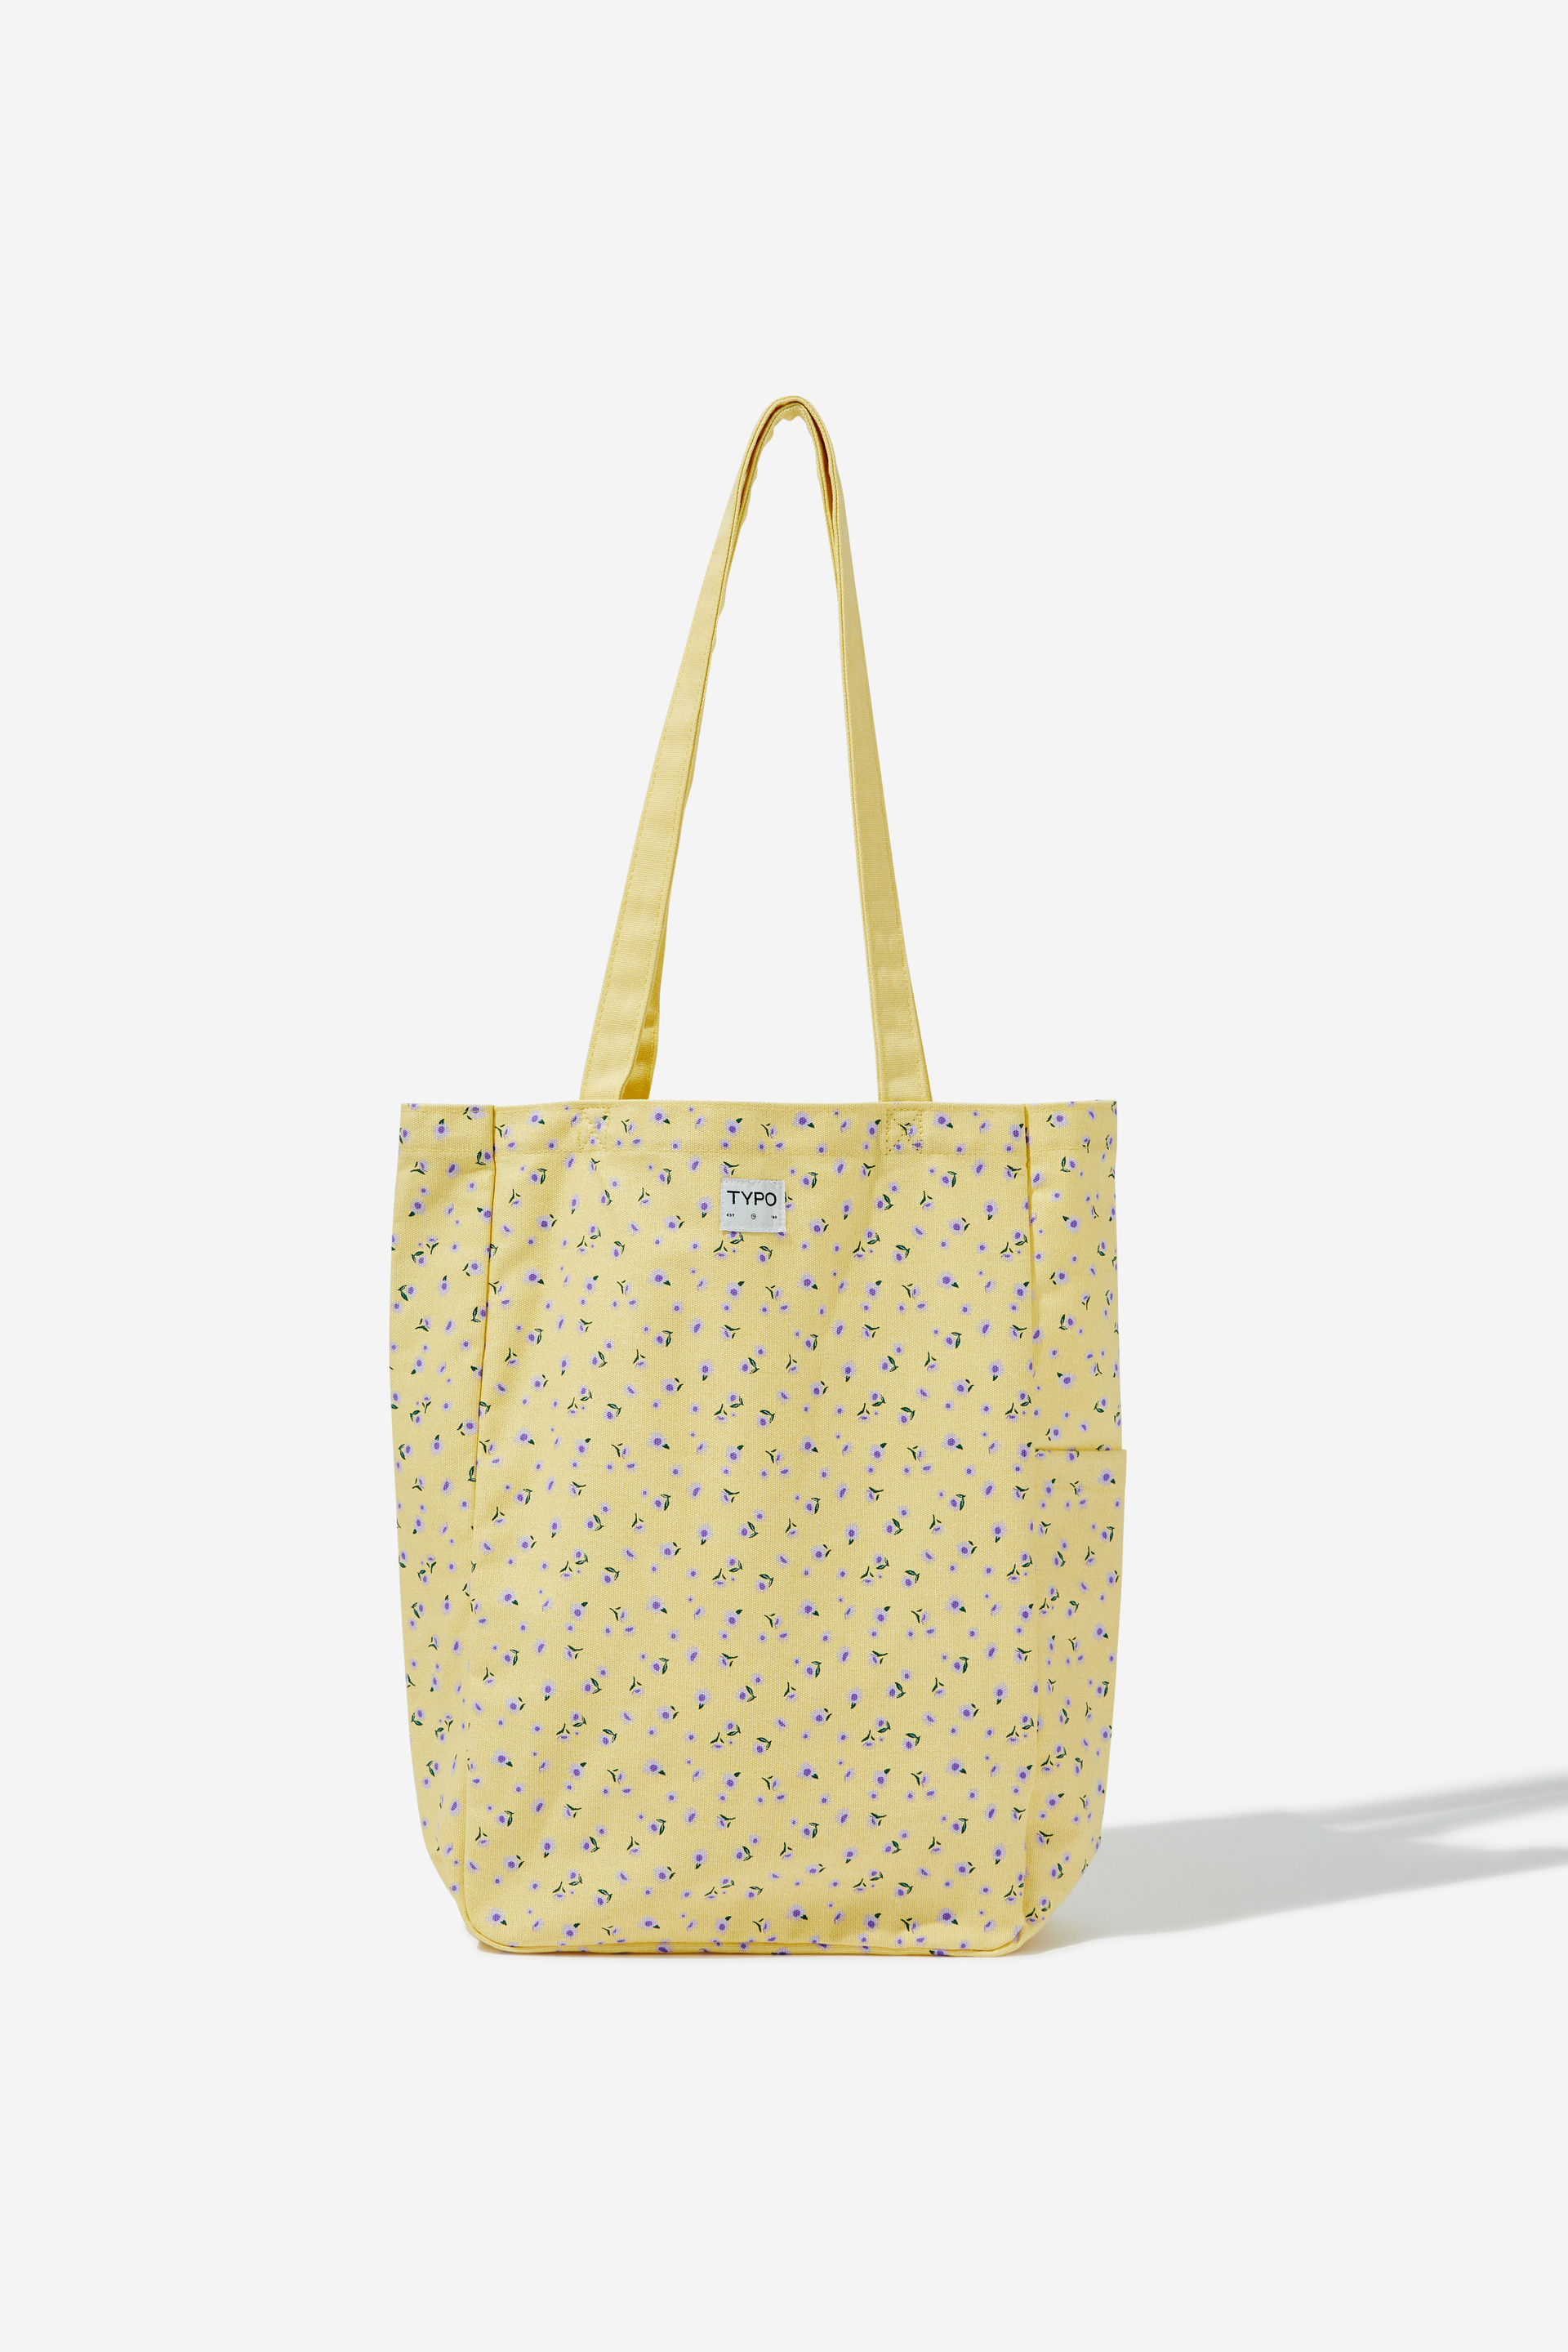 Typo - Art Tote Bag - Daisy ditsy / butter